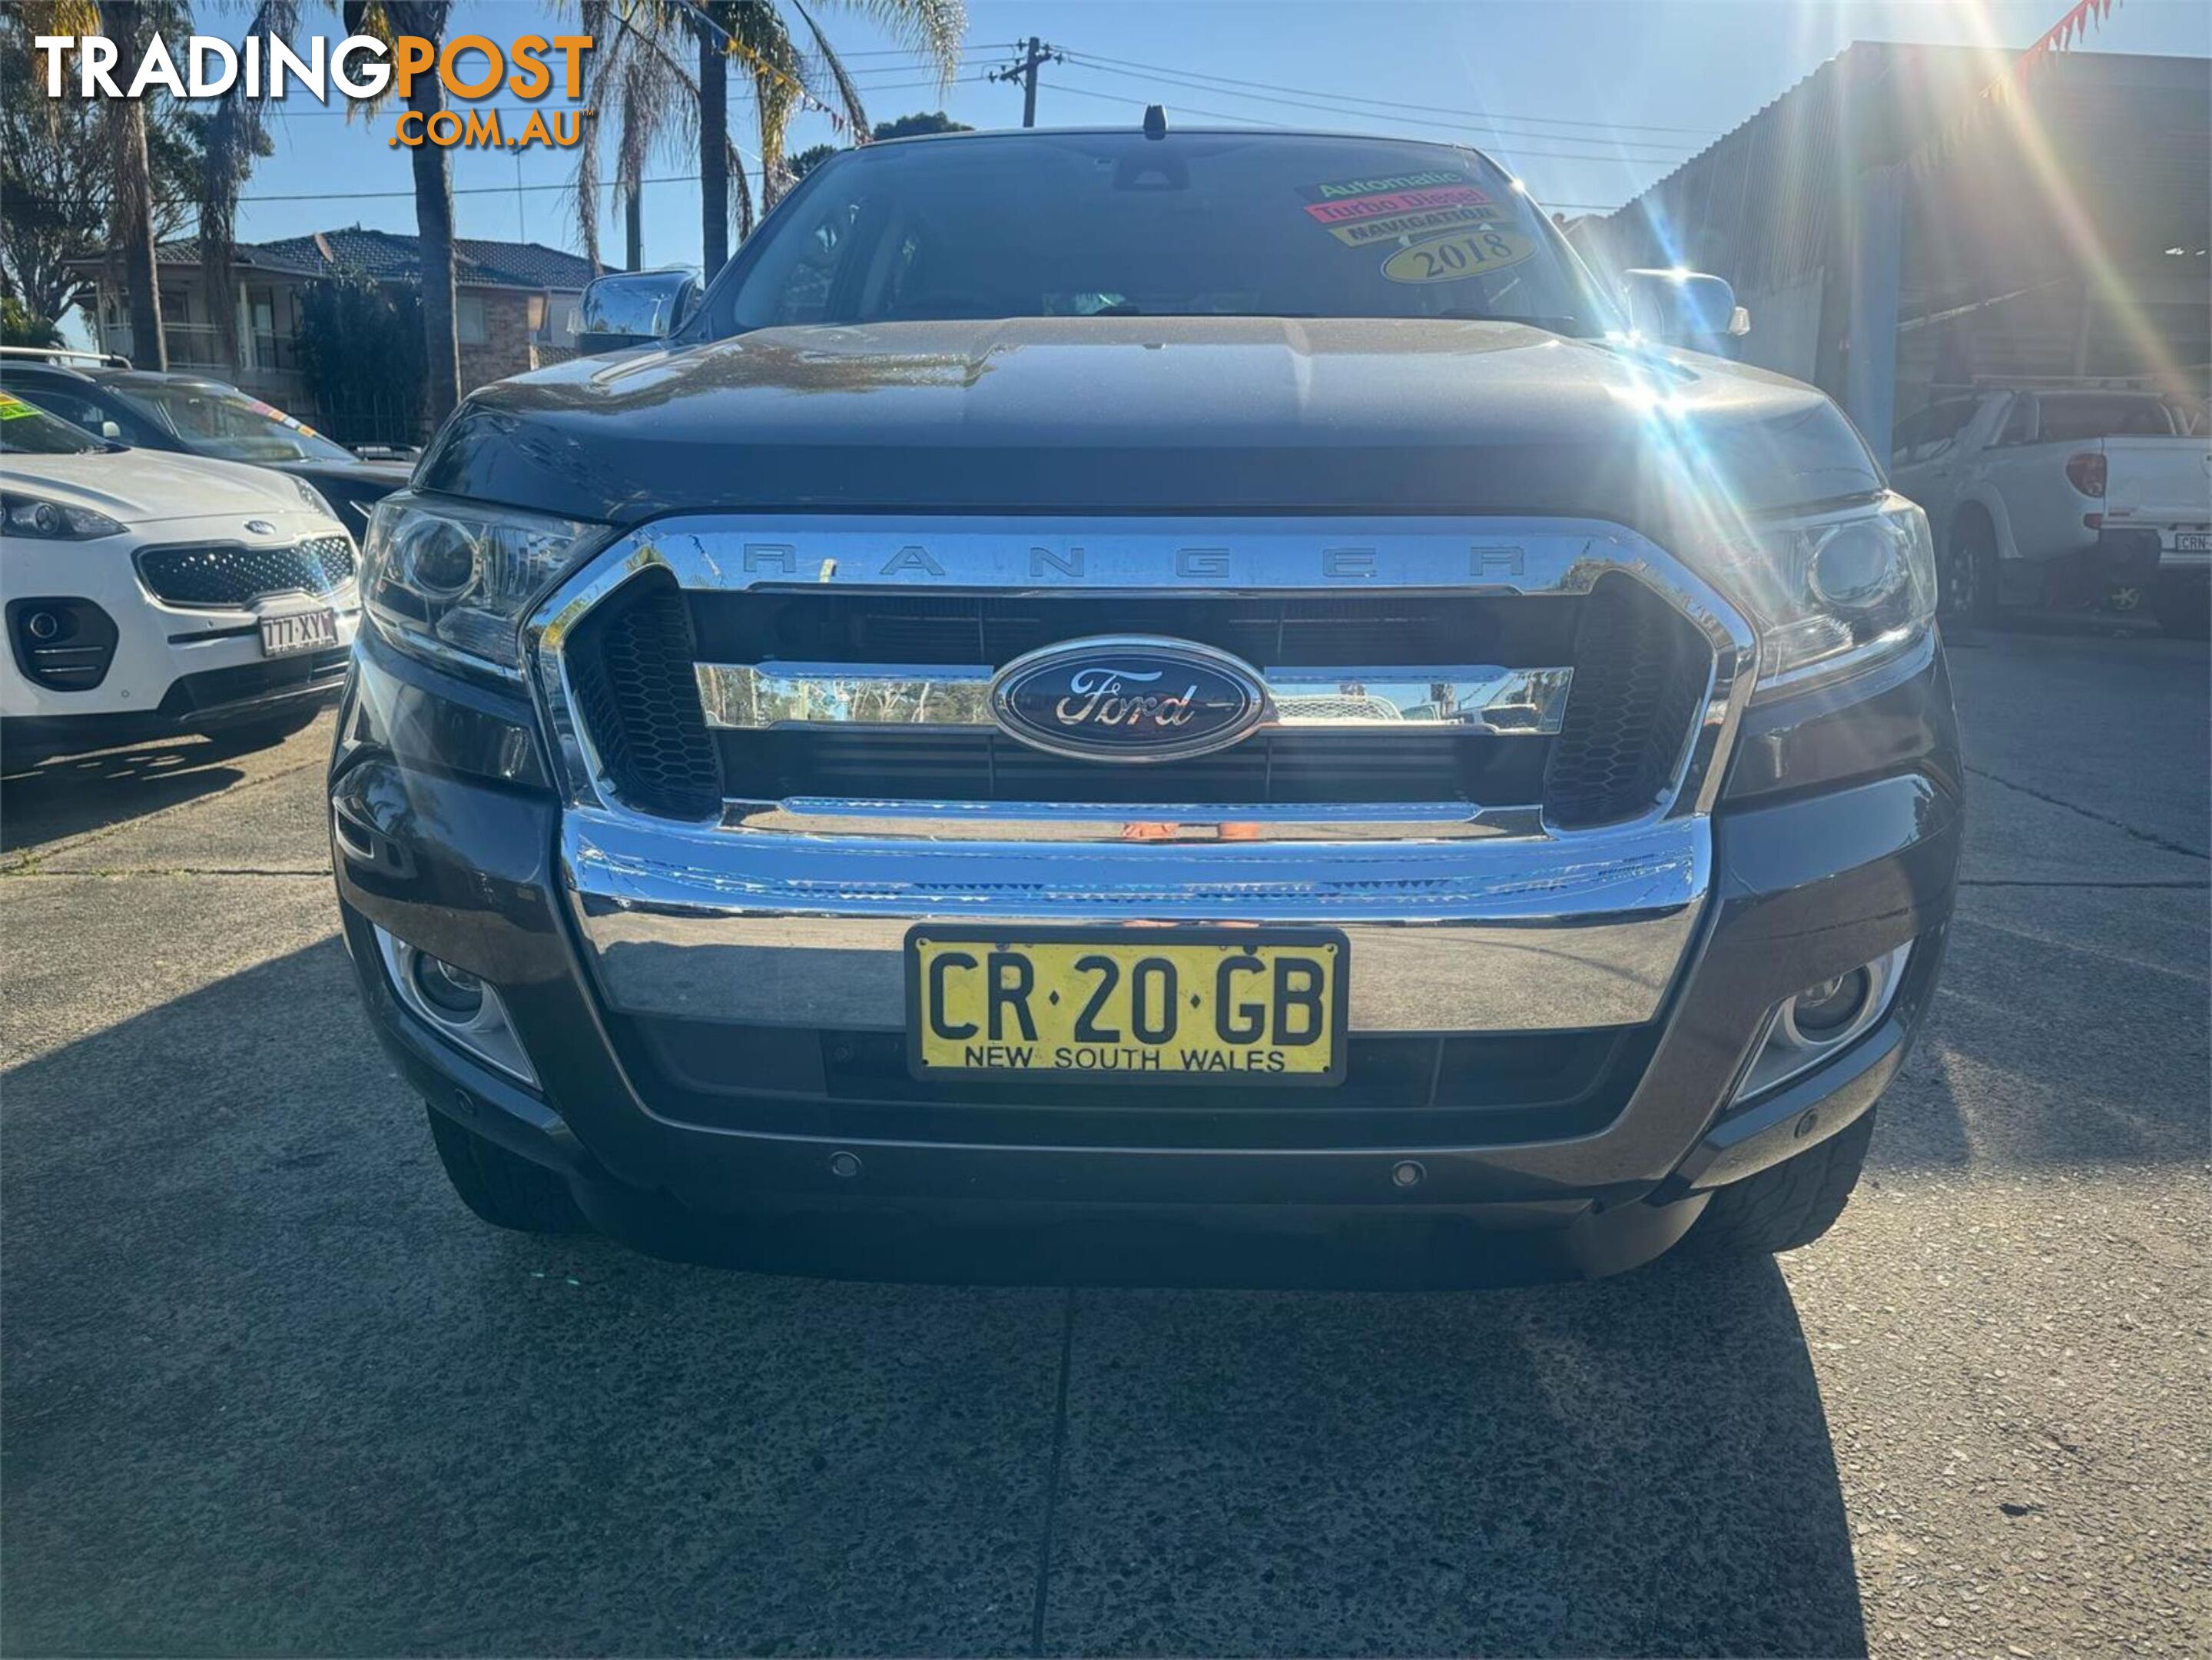 2018 FORD RANGER XLTHI RIDER PXMKIII2019 00MY UTILITY